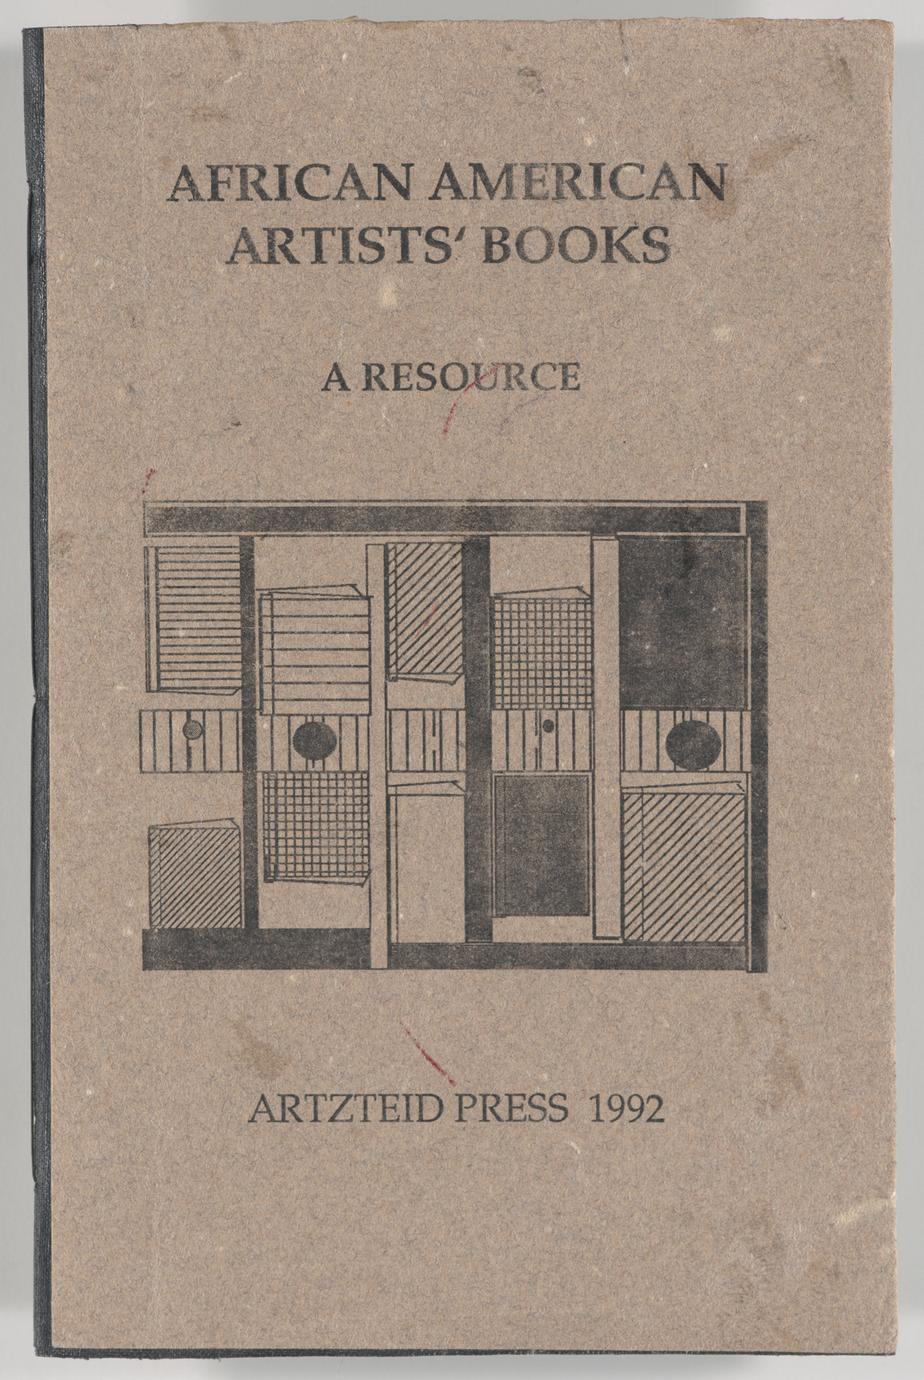 African American artists' books : a resource